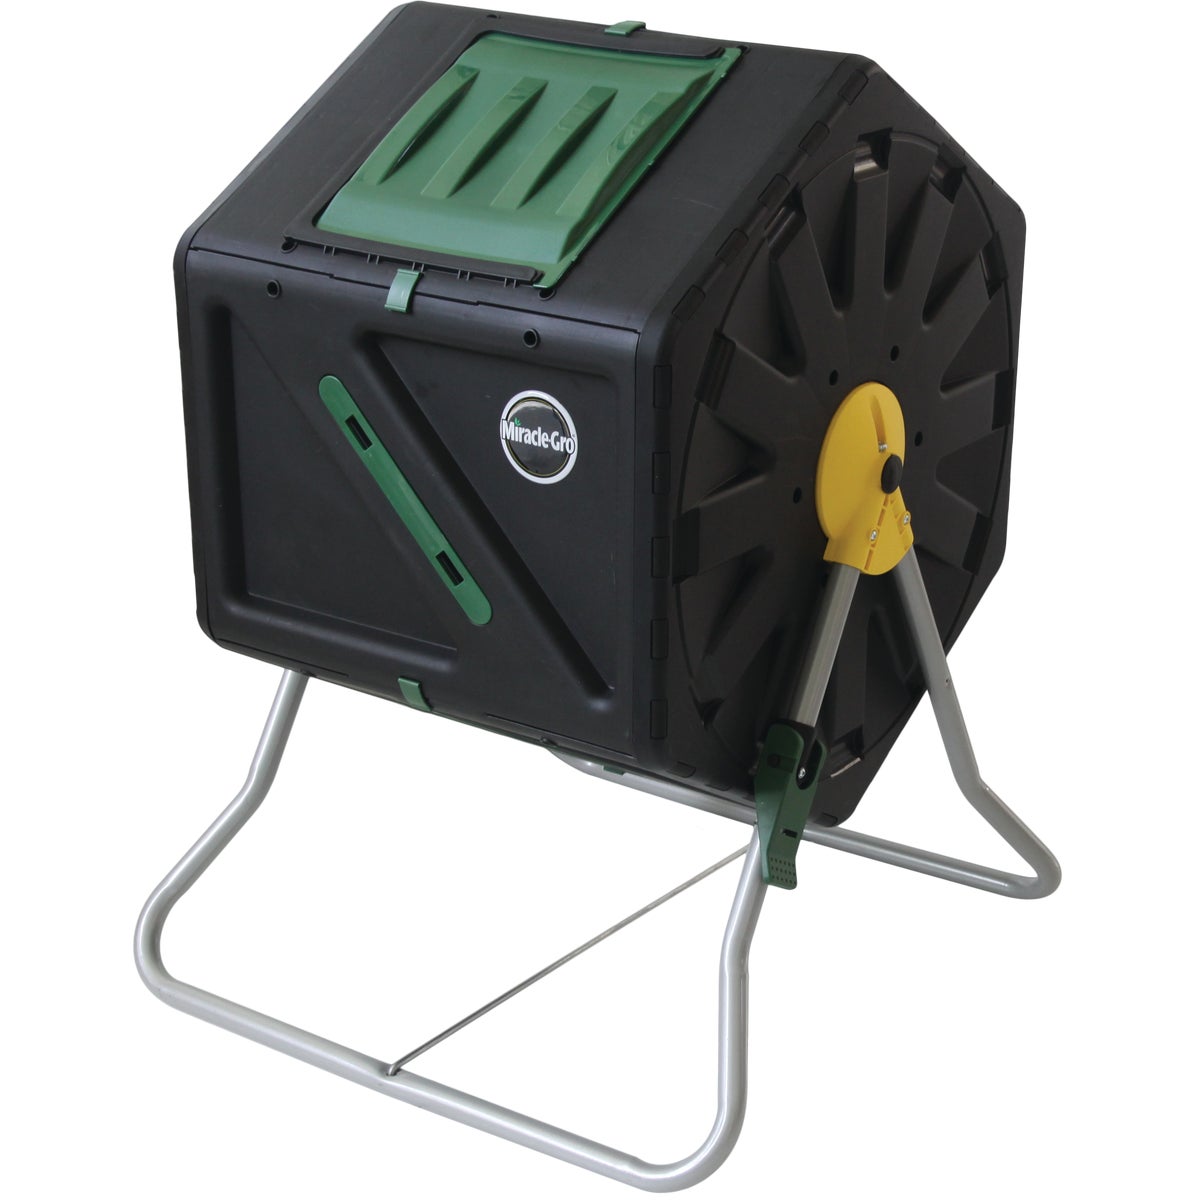 Item 704830, Tumbling composter with 28 gallon chamber capacity.